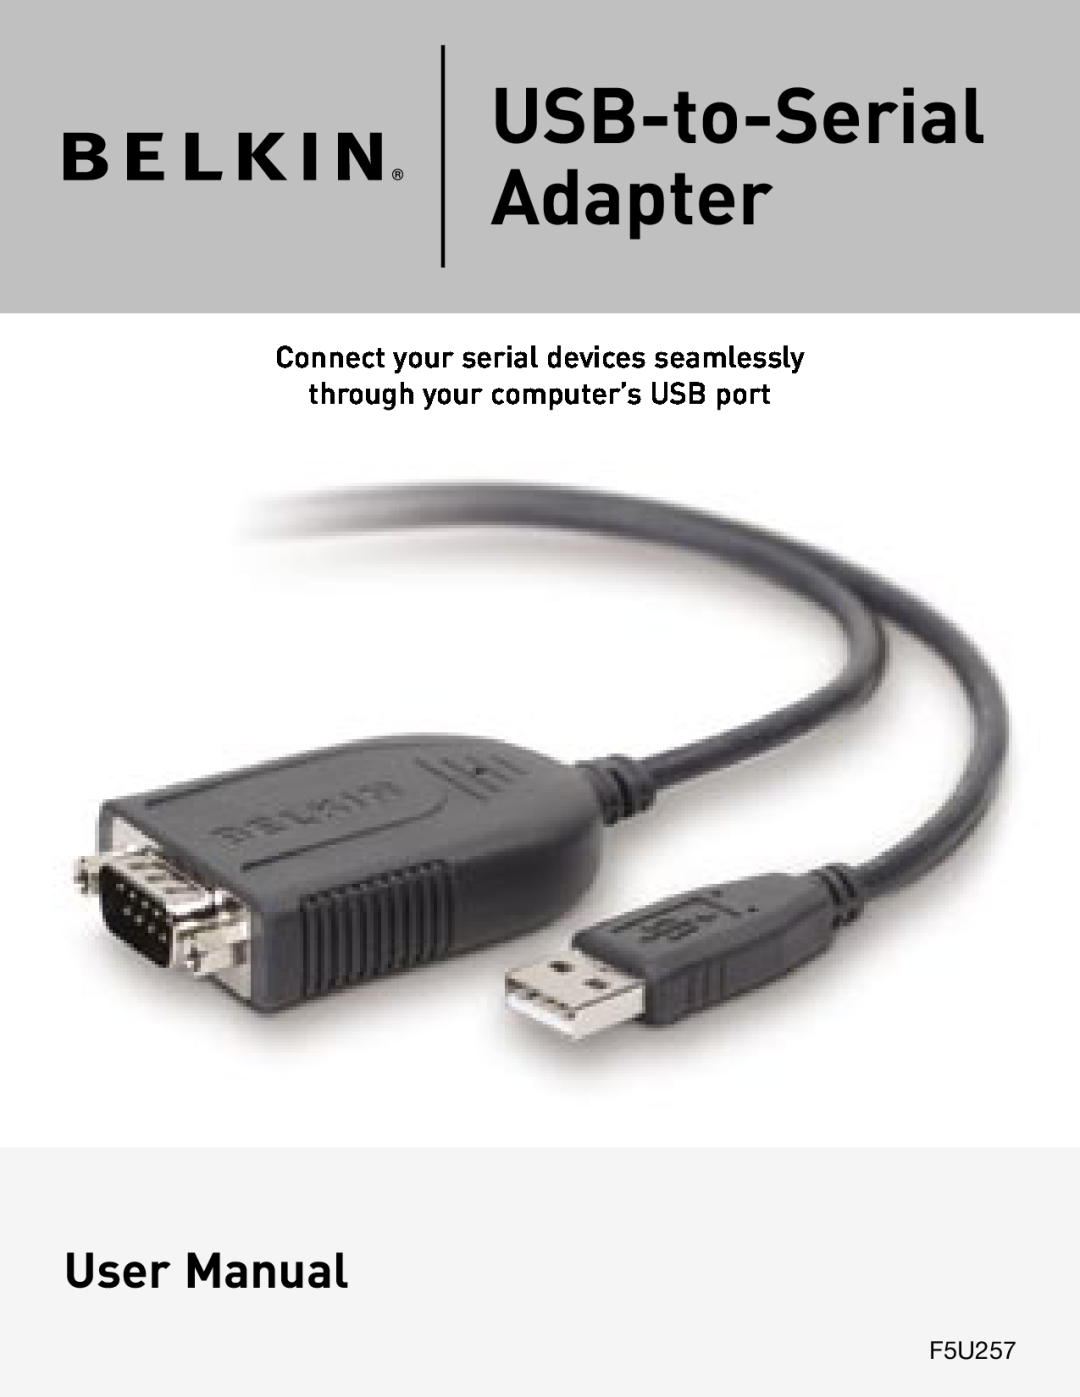 Belkin F5U257 user manual USB-to-Serial Adapter, Connect your serial devices seamlessly, through your computer’s USB port 